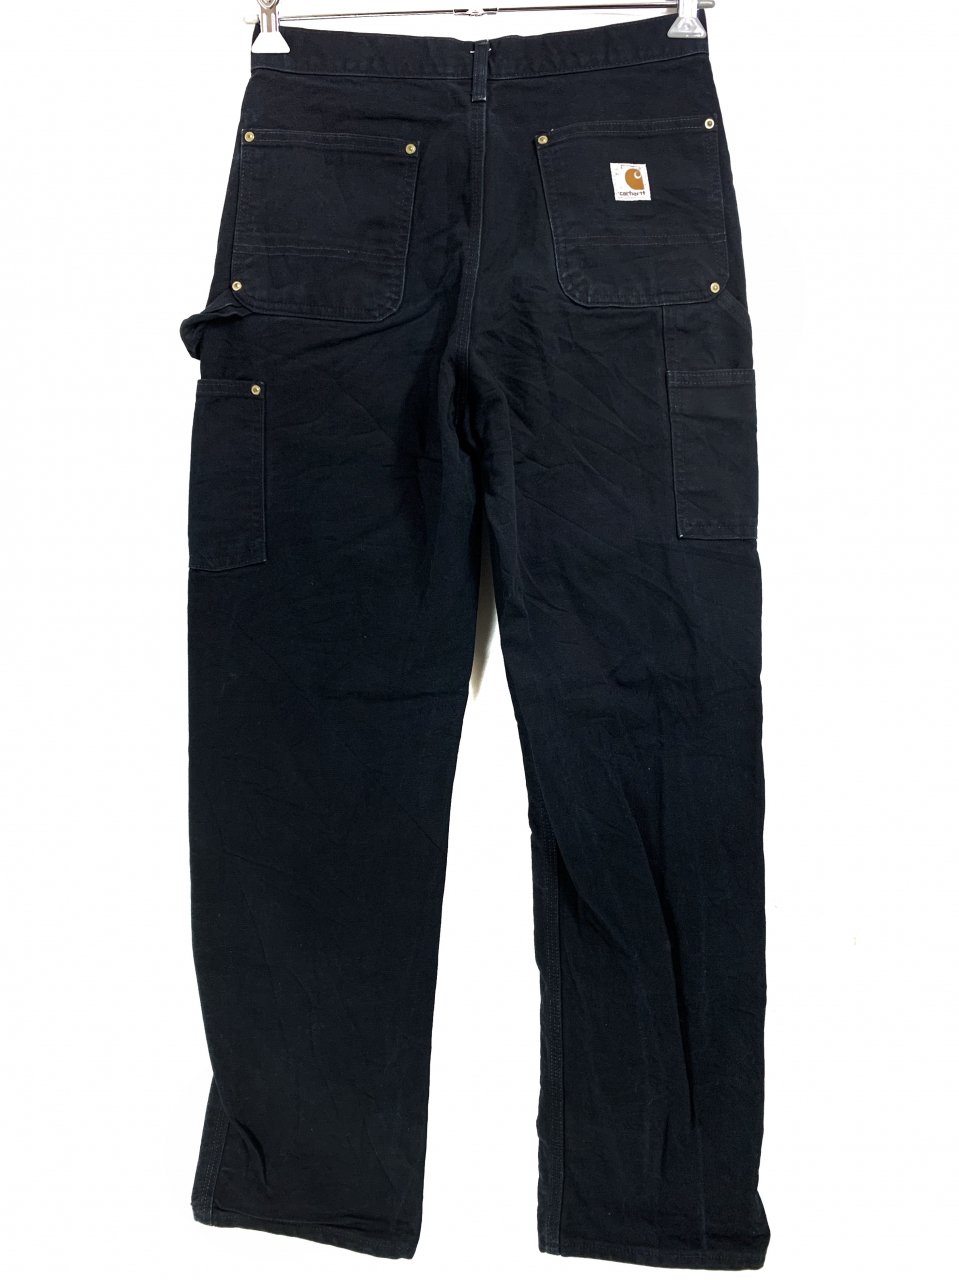 USA製 Carhartt Firm Duck Double-Front Work Dungaree 黒 30×32 カーハート ダブルニー ダック地  ペインターパンツ ワークパンツ B01-BLK - NEWJOKE ONLINE STORE